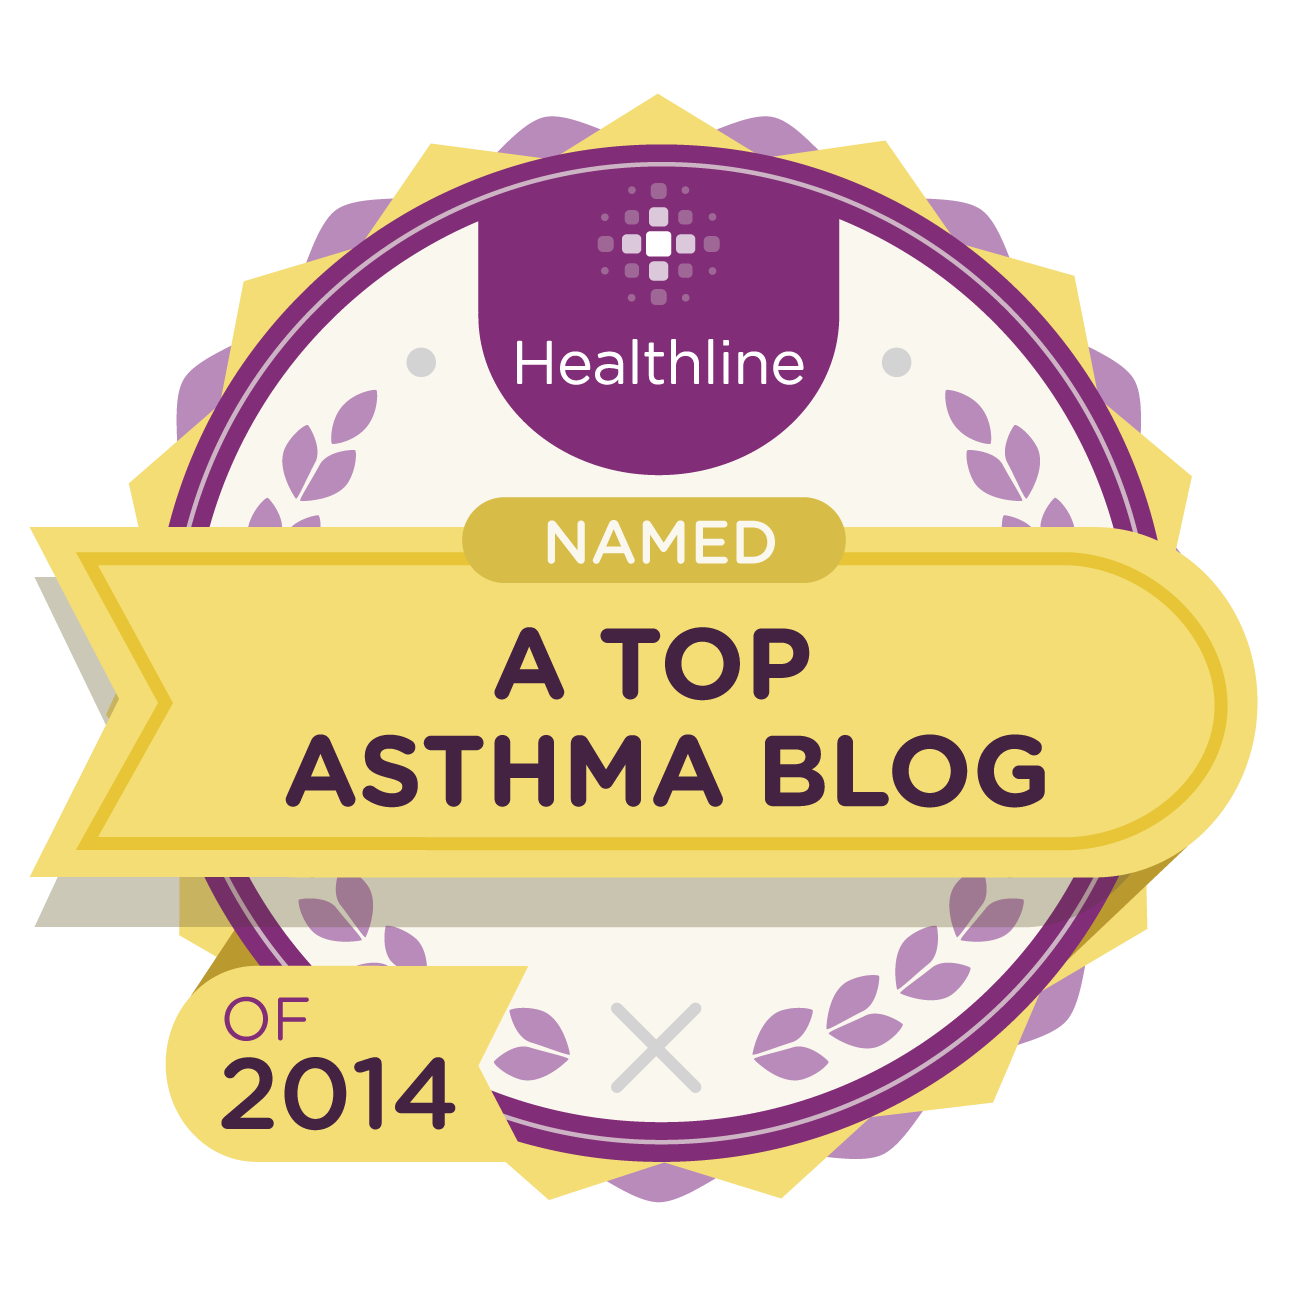 The 11 Best Asthma Health Blogs of 2014